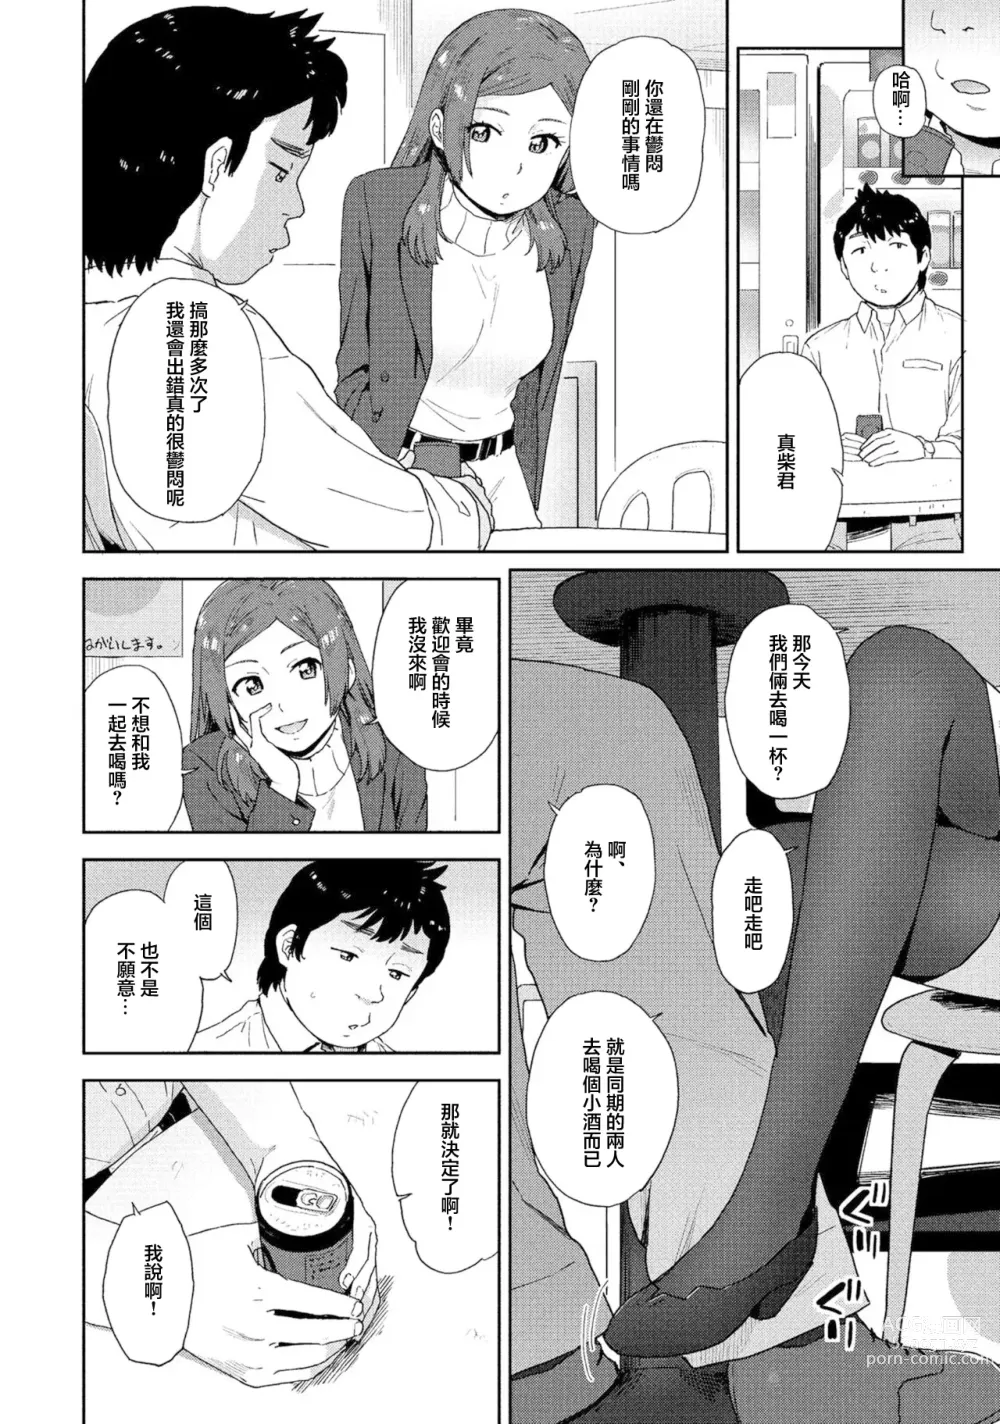 Page 4 of doujinshi 可靠依賴性